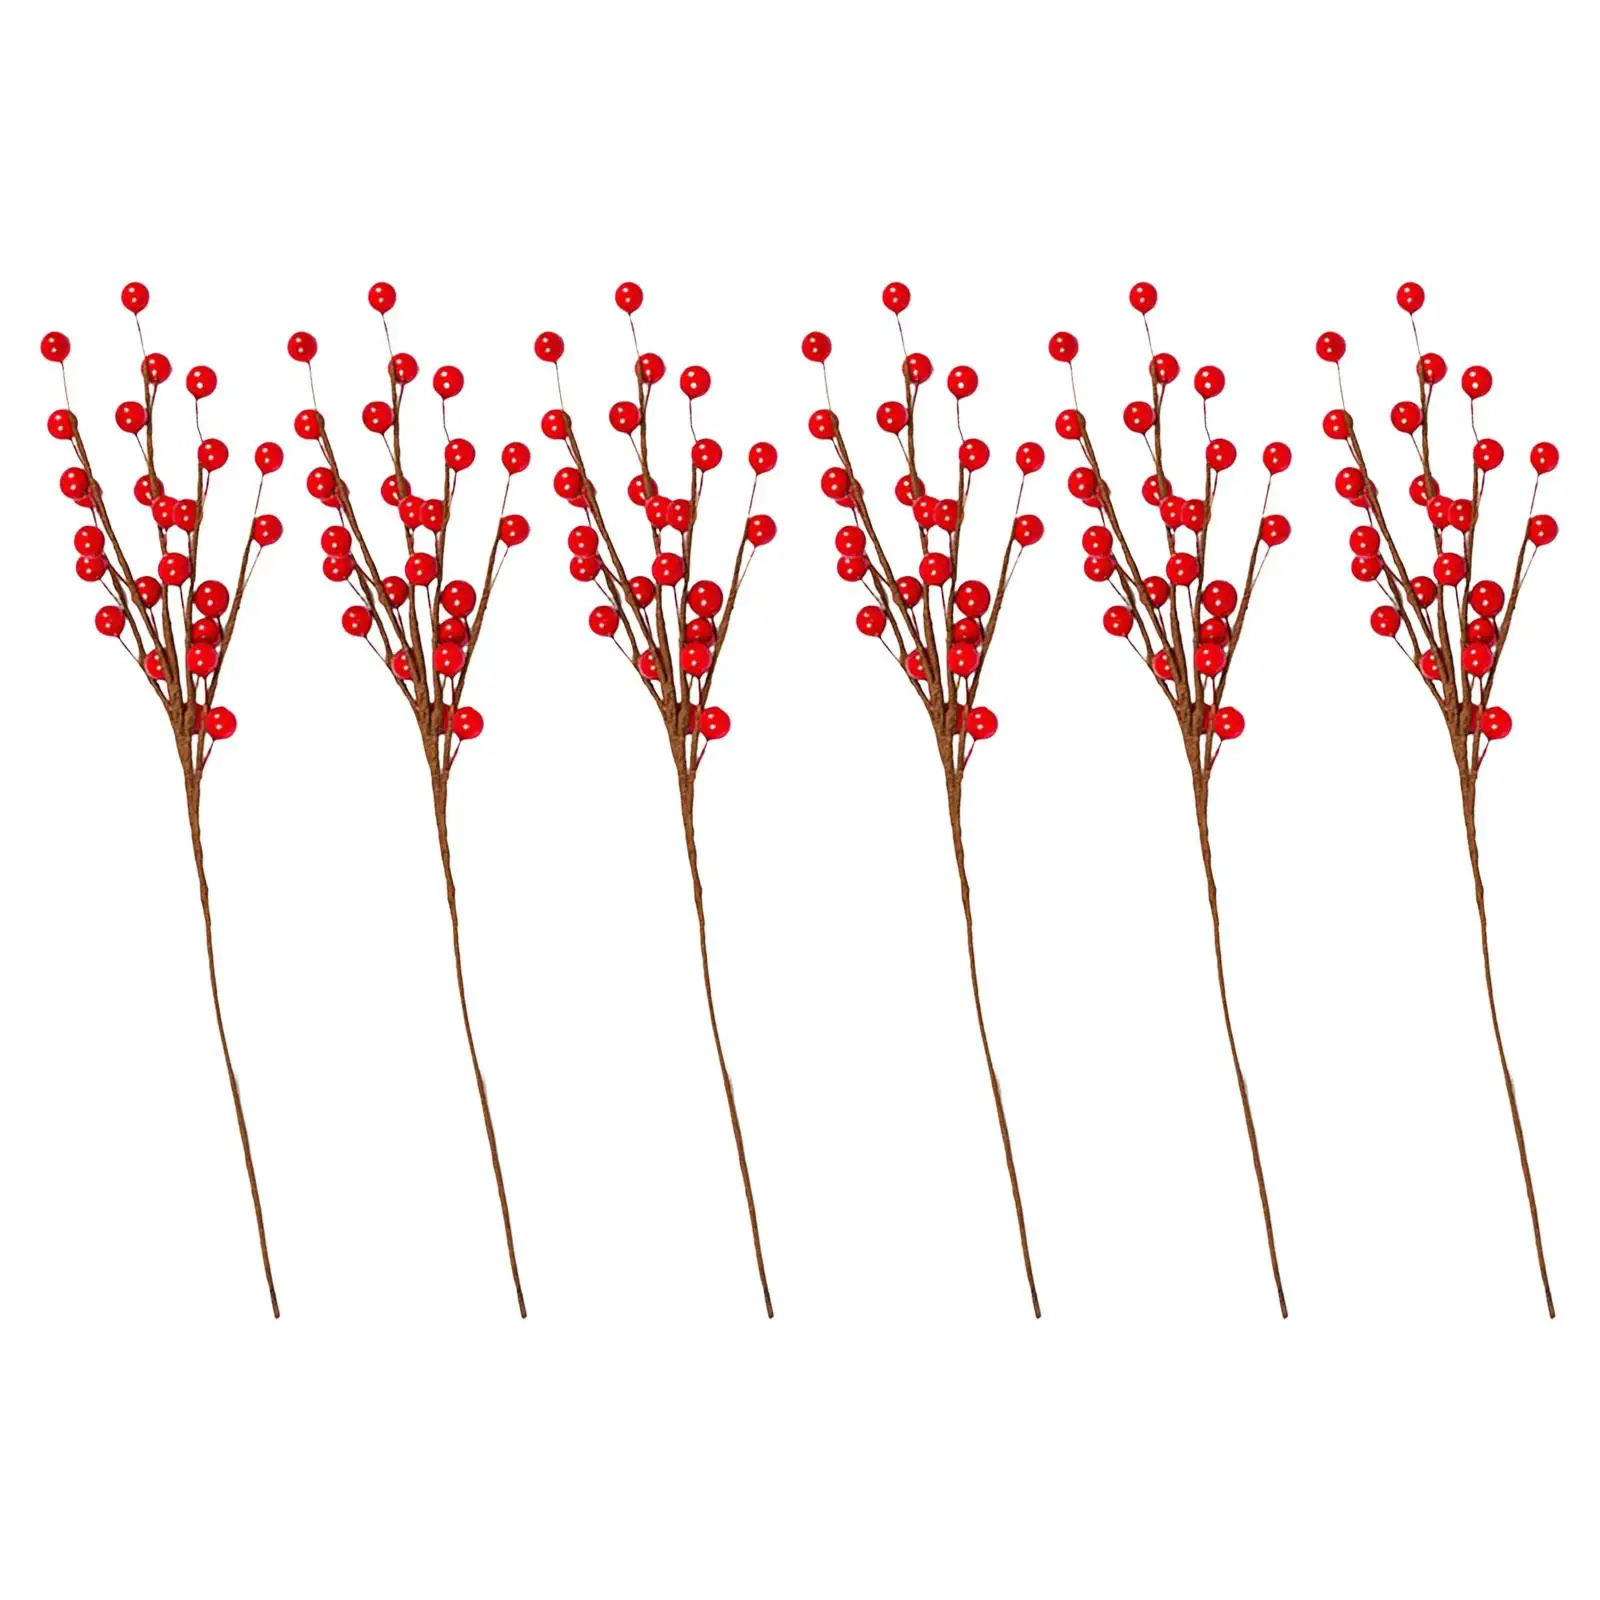 6Pcs Artificial Berry Stems Home Decor Decorative Desktop Ornaments Berry Twig Stems for Halloween Home Holiday Christmas Office